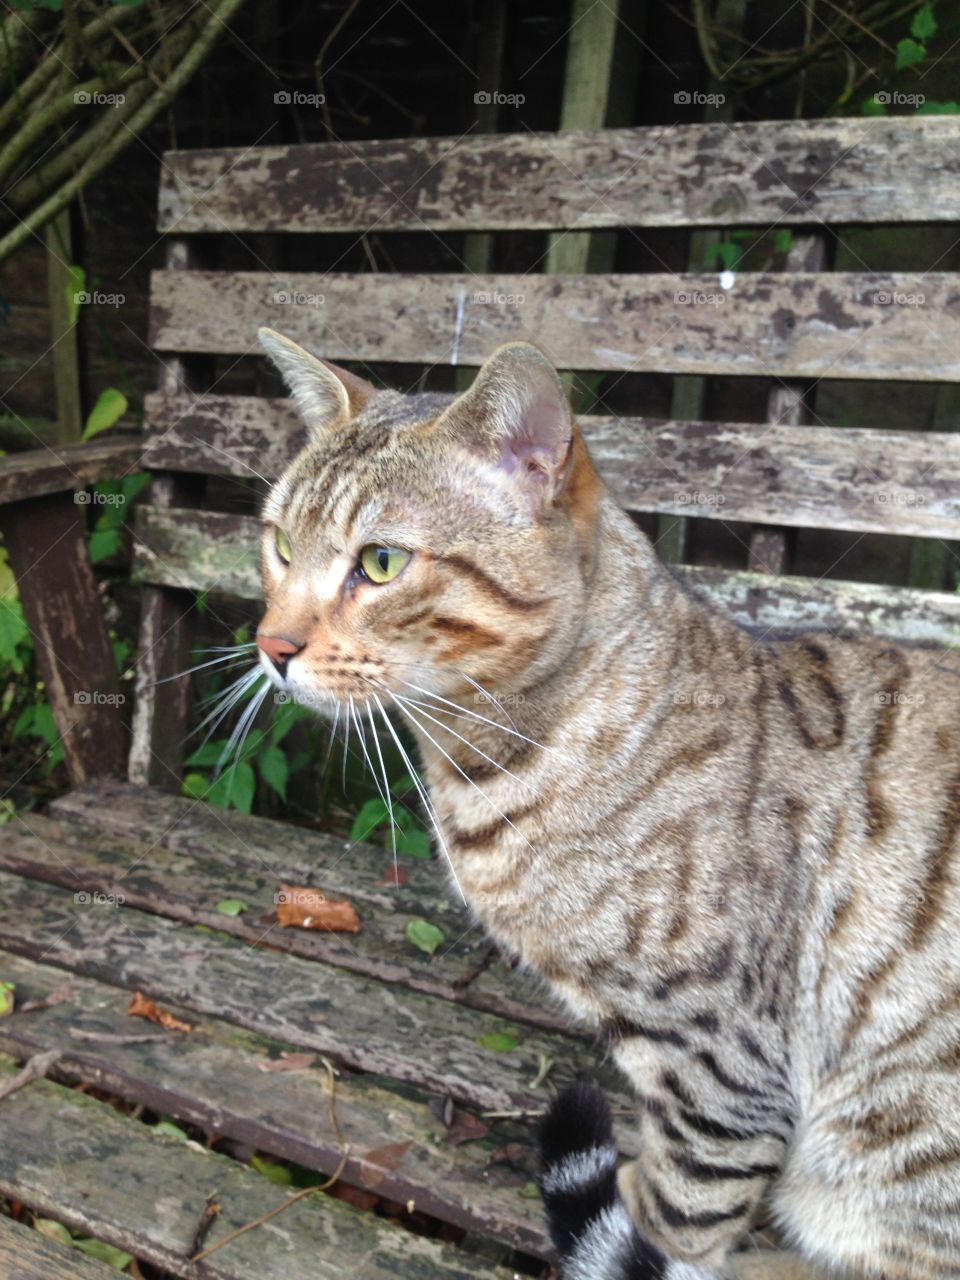 Tiger-striped tabby cat standing on a garden seat